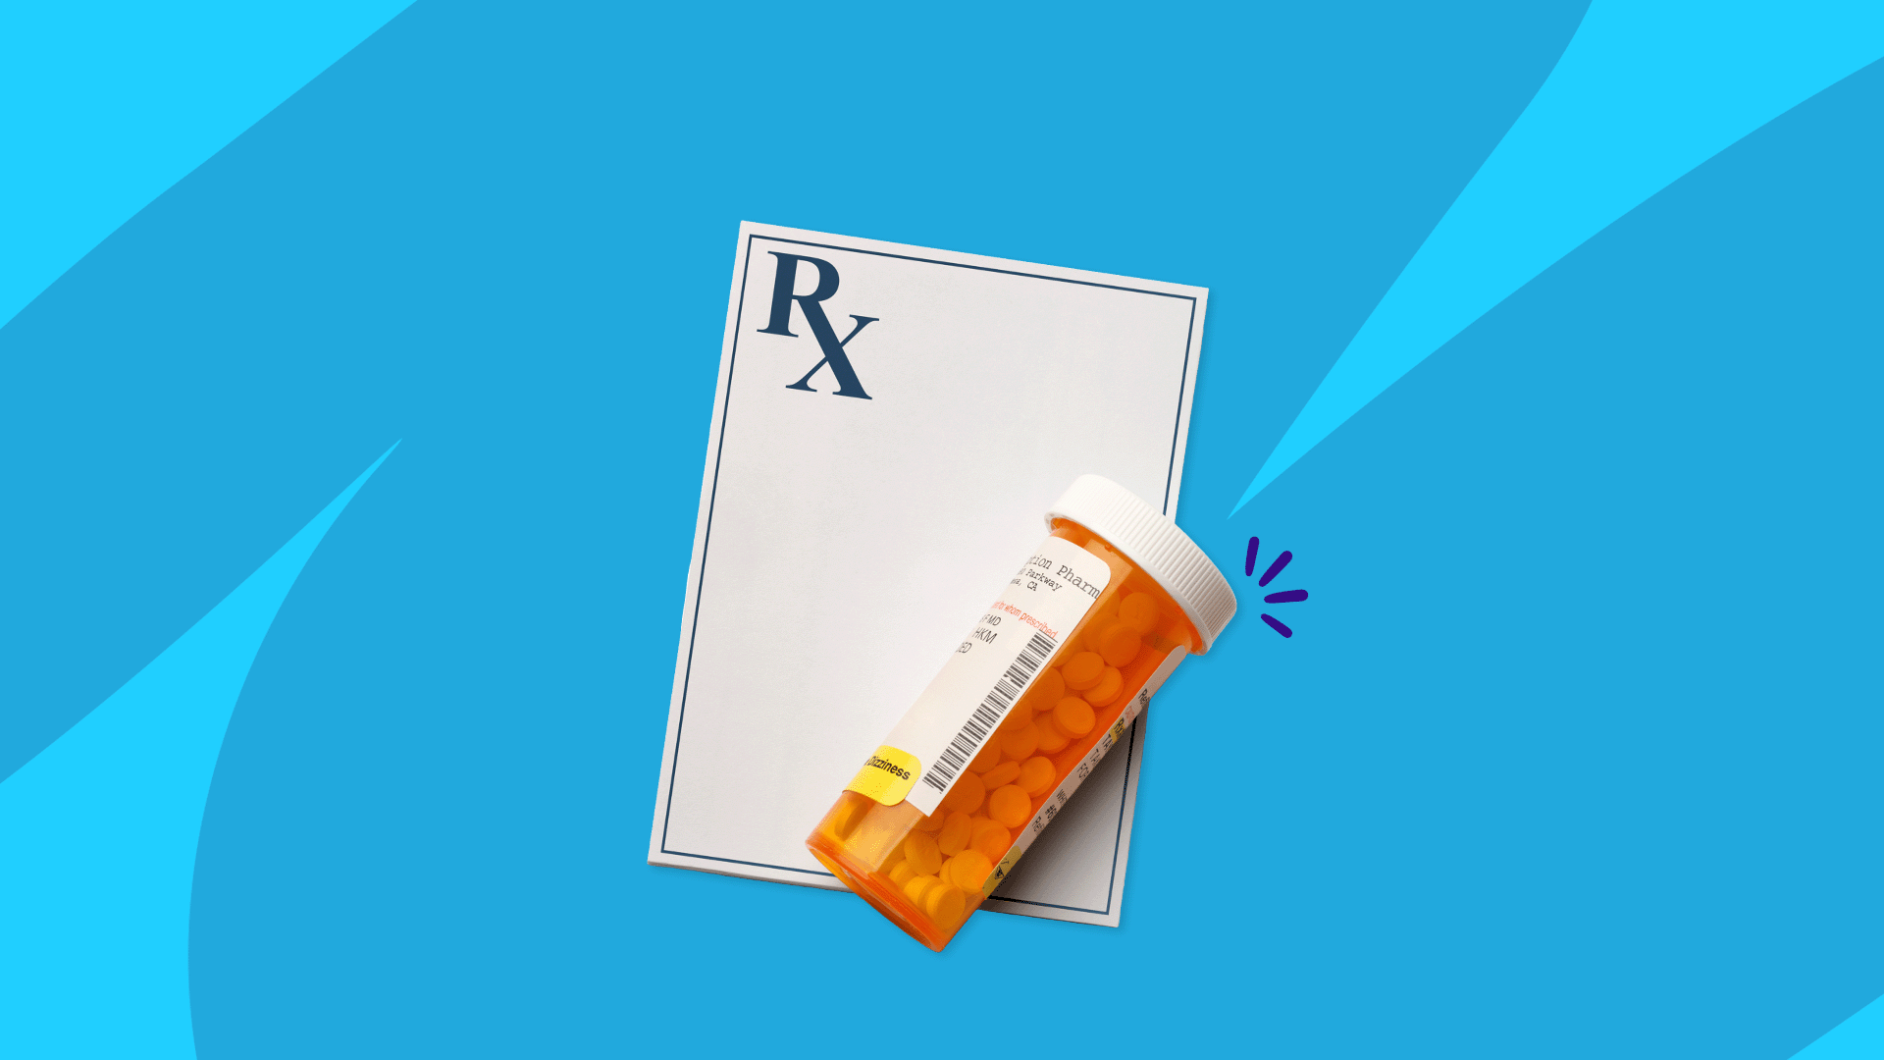 Rx prescription pad and Rx pill bottle: Propranolol side effects